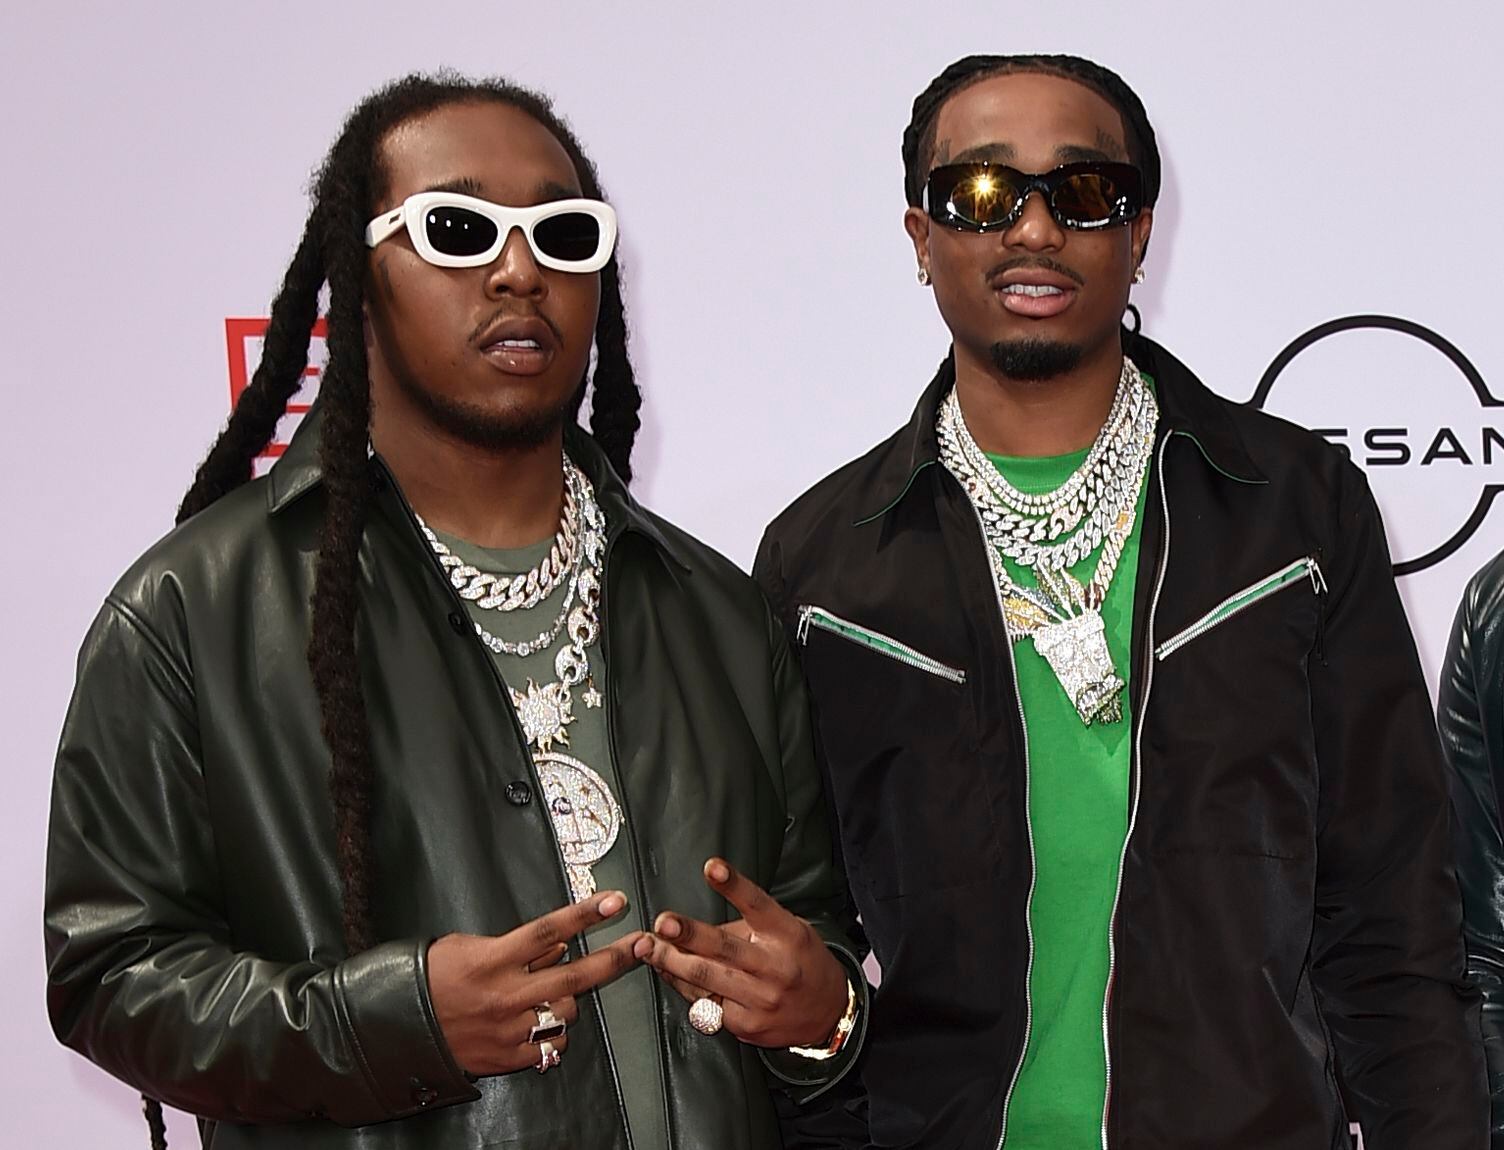 Takeoff, dead at 28 in shooting, was ‘chill’ Migos member